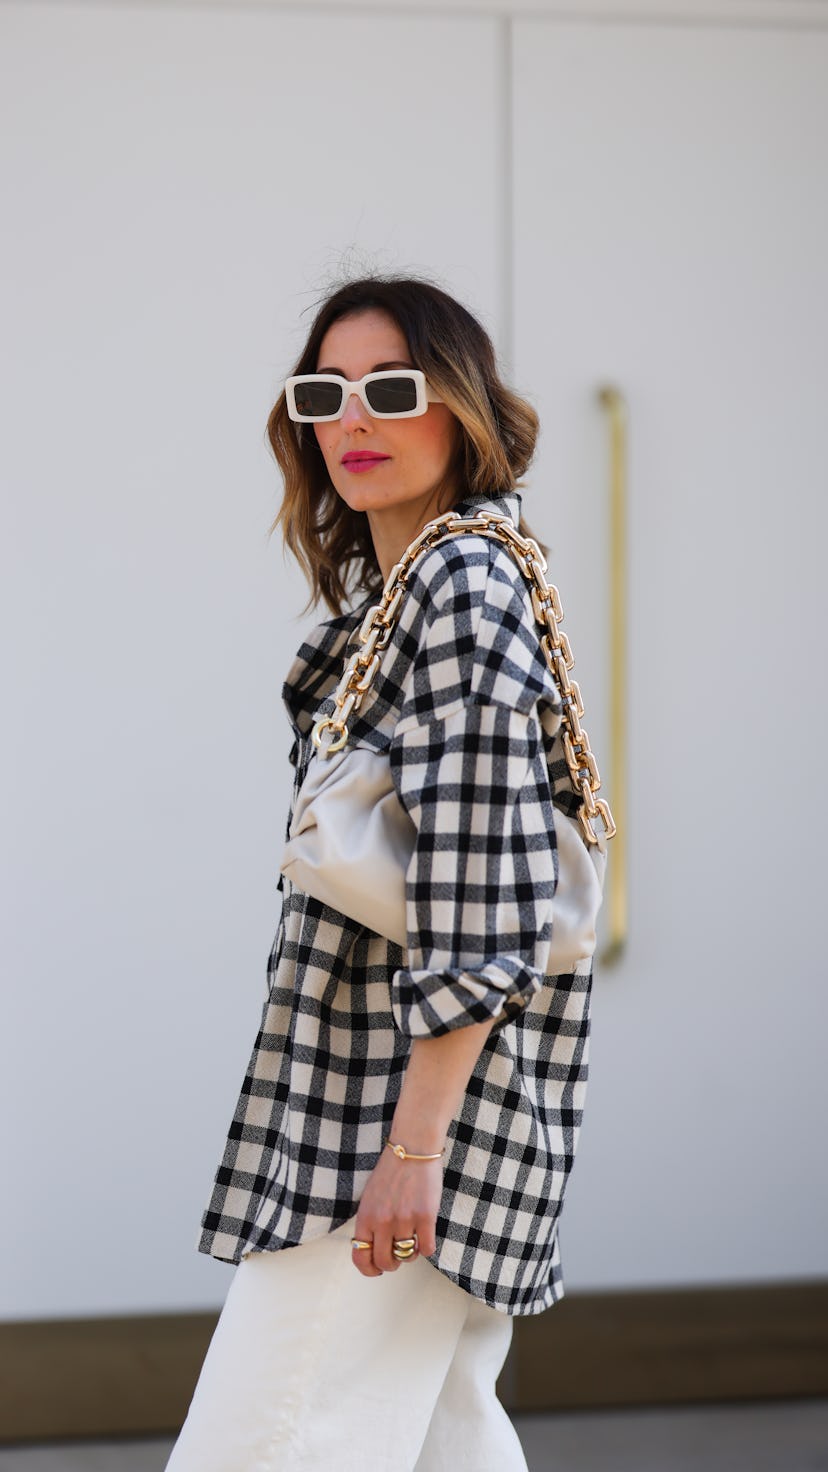 Elise Soho walking in the street and wearing a black and white Checkerboard Shirt